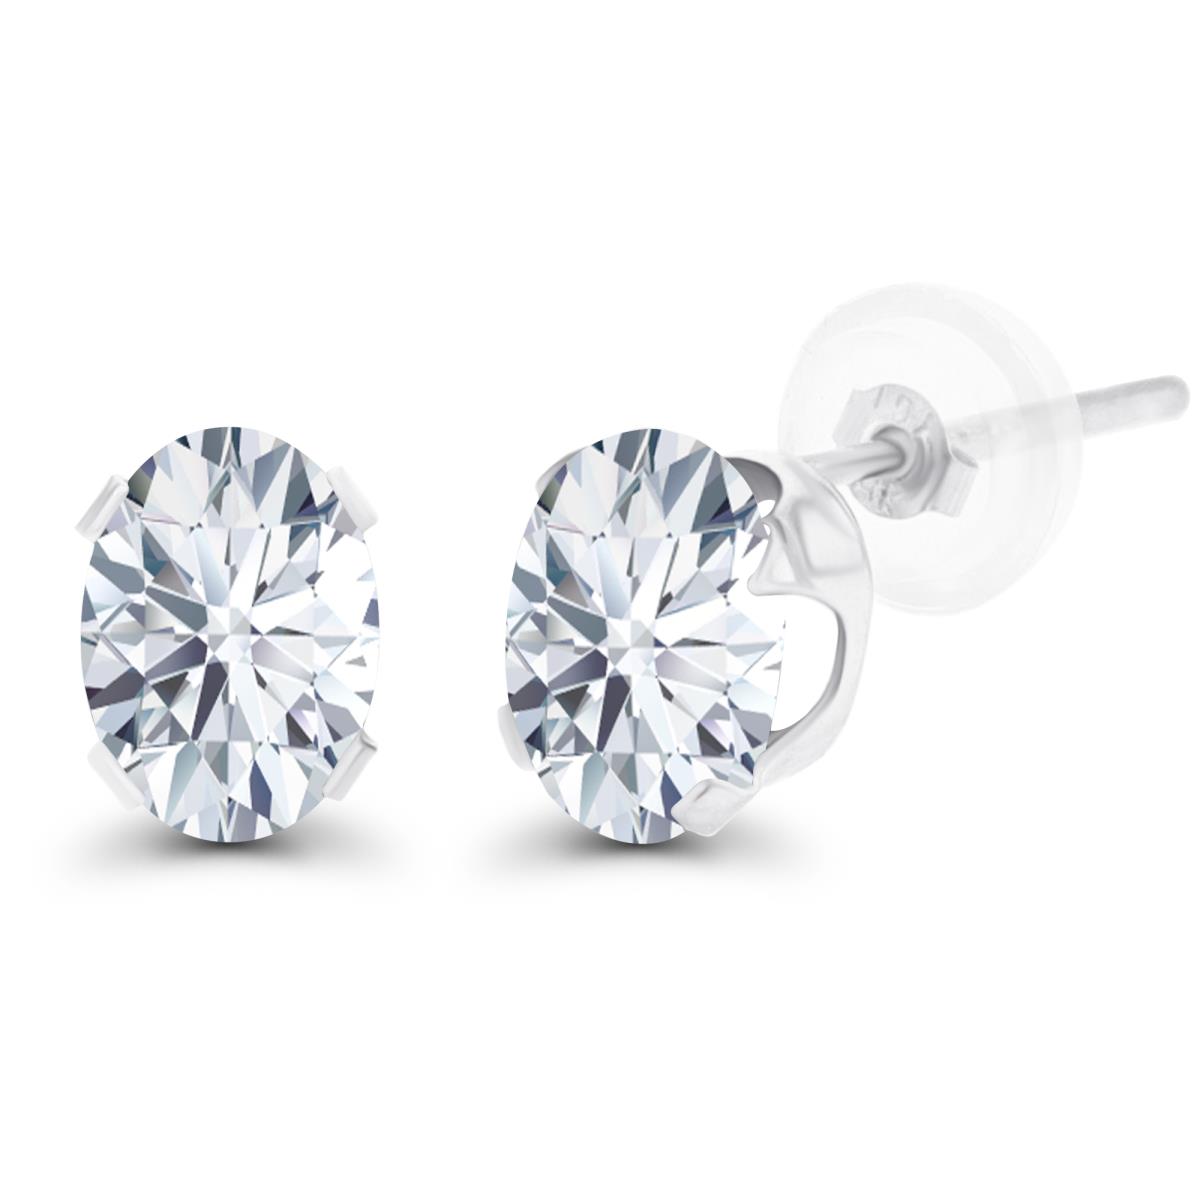 10K White Gold 7x5mm Oval Cr White Sapphire Stud Earring with Silicone Back